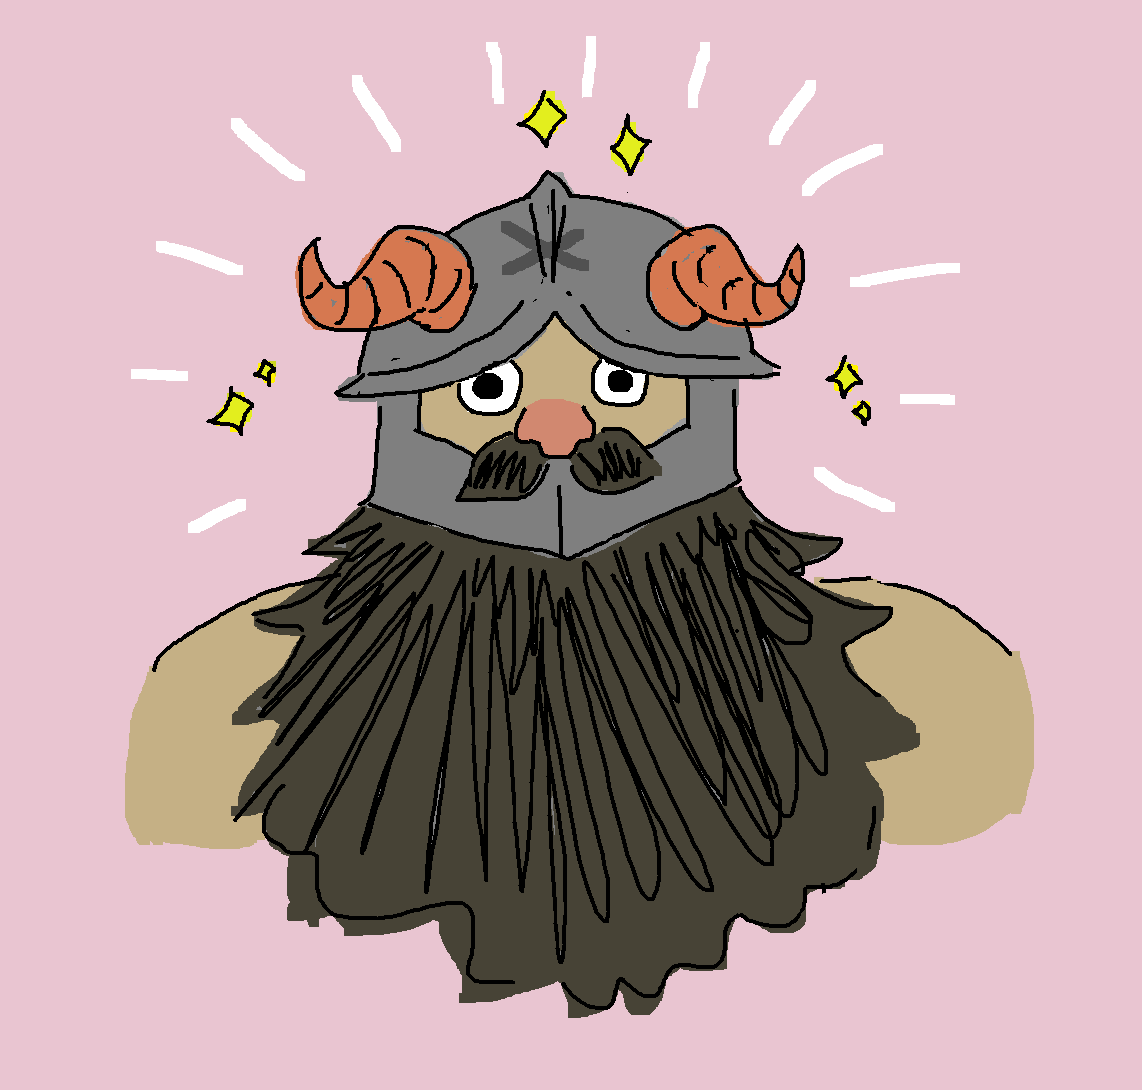 mspaint drawing of senshi from dungeon meshi. he is a dwarf with round eyes and a big nose, his bushy dark beard sticks out from under his horned helmet. he is sparkling and shining